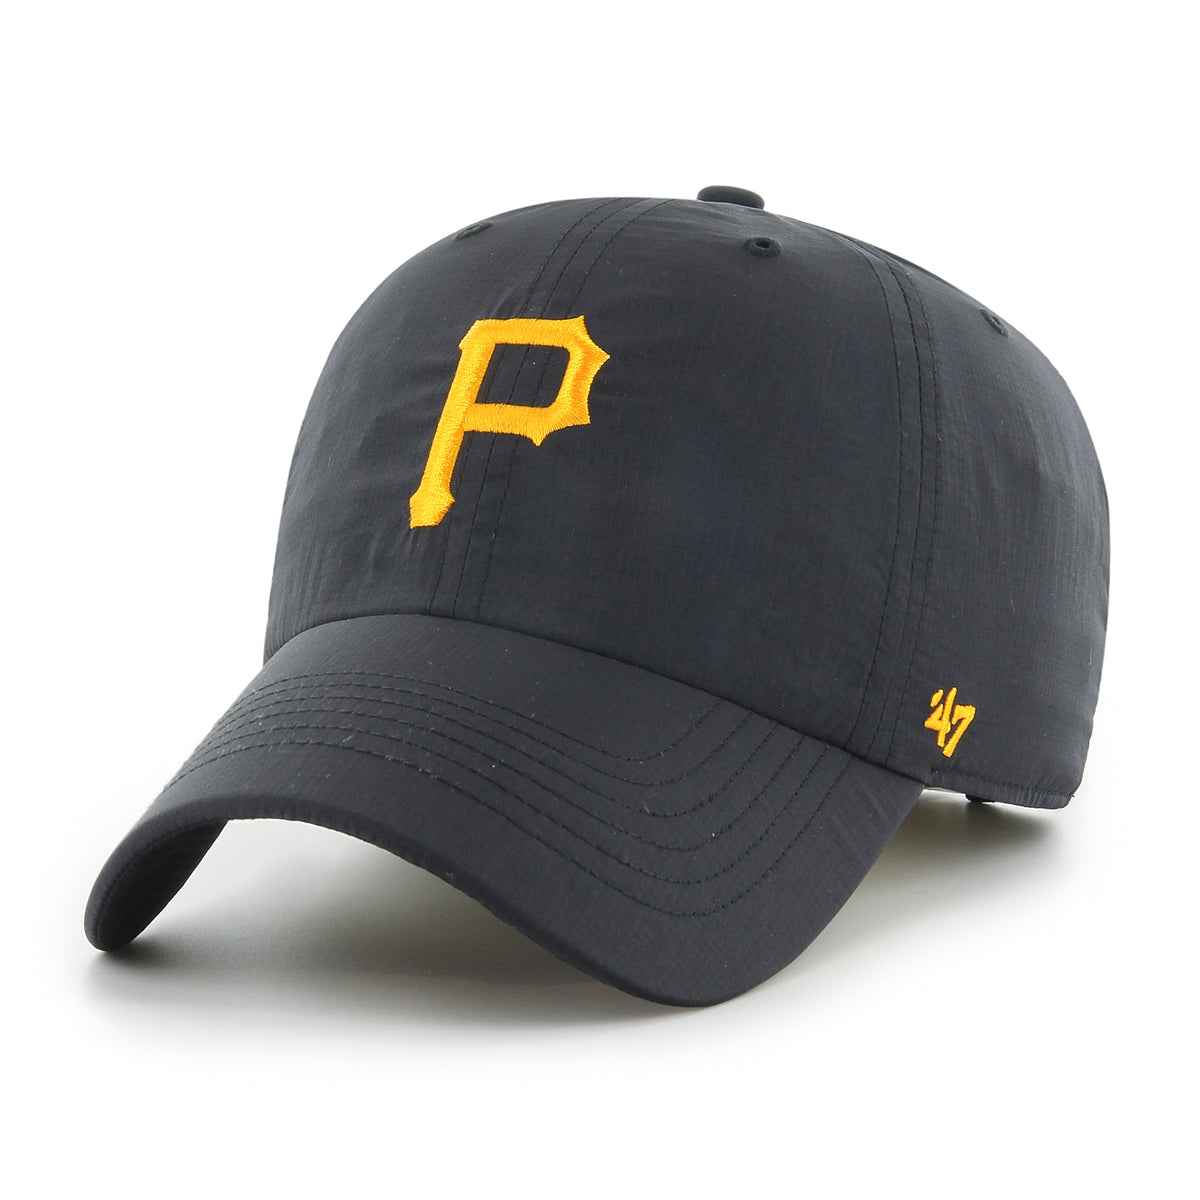 PITTSBURGH PIRATES BRRR '47 CLEAN UP